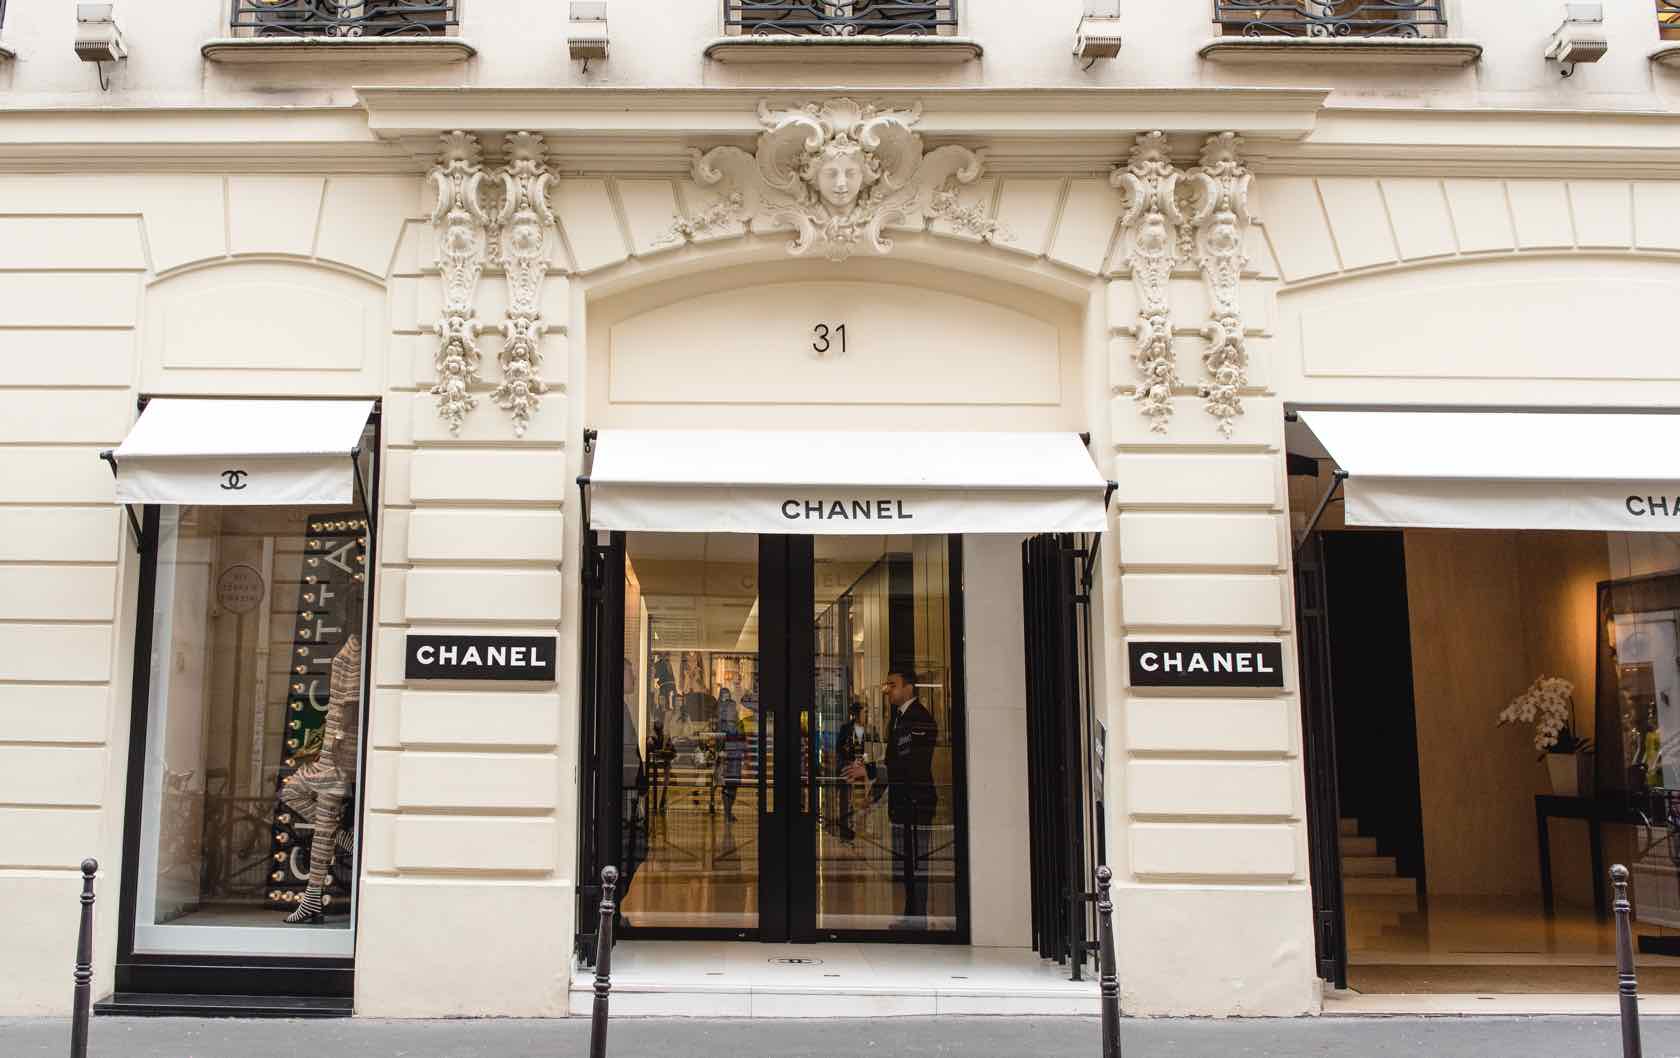 Soldes in France: Guide to the Biannual Sales in Paris